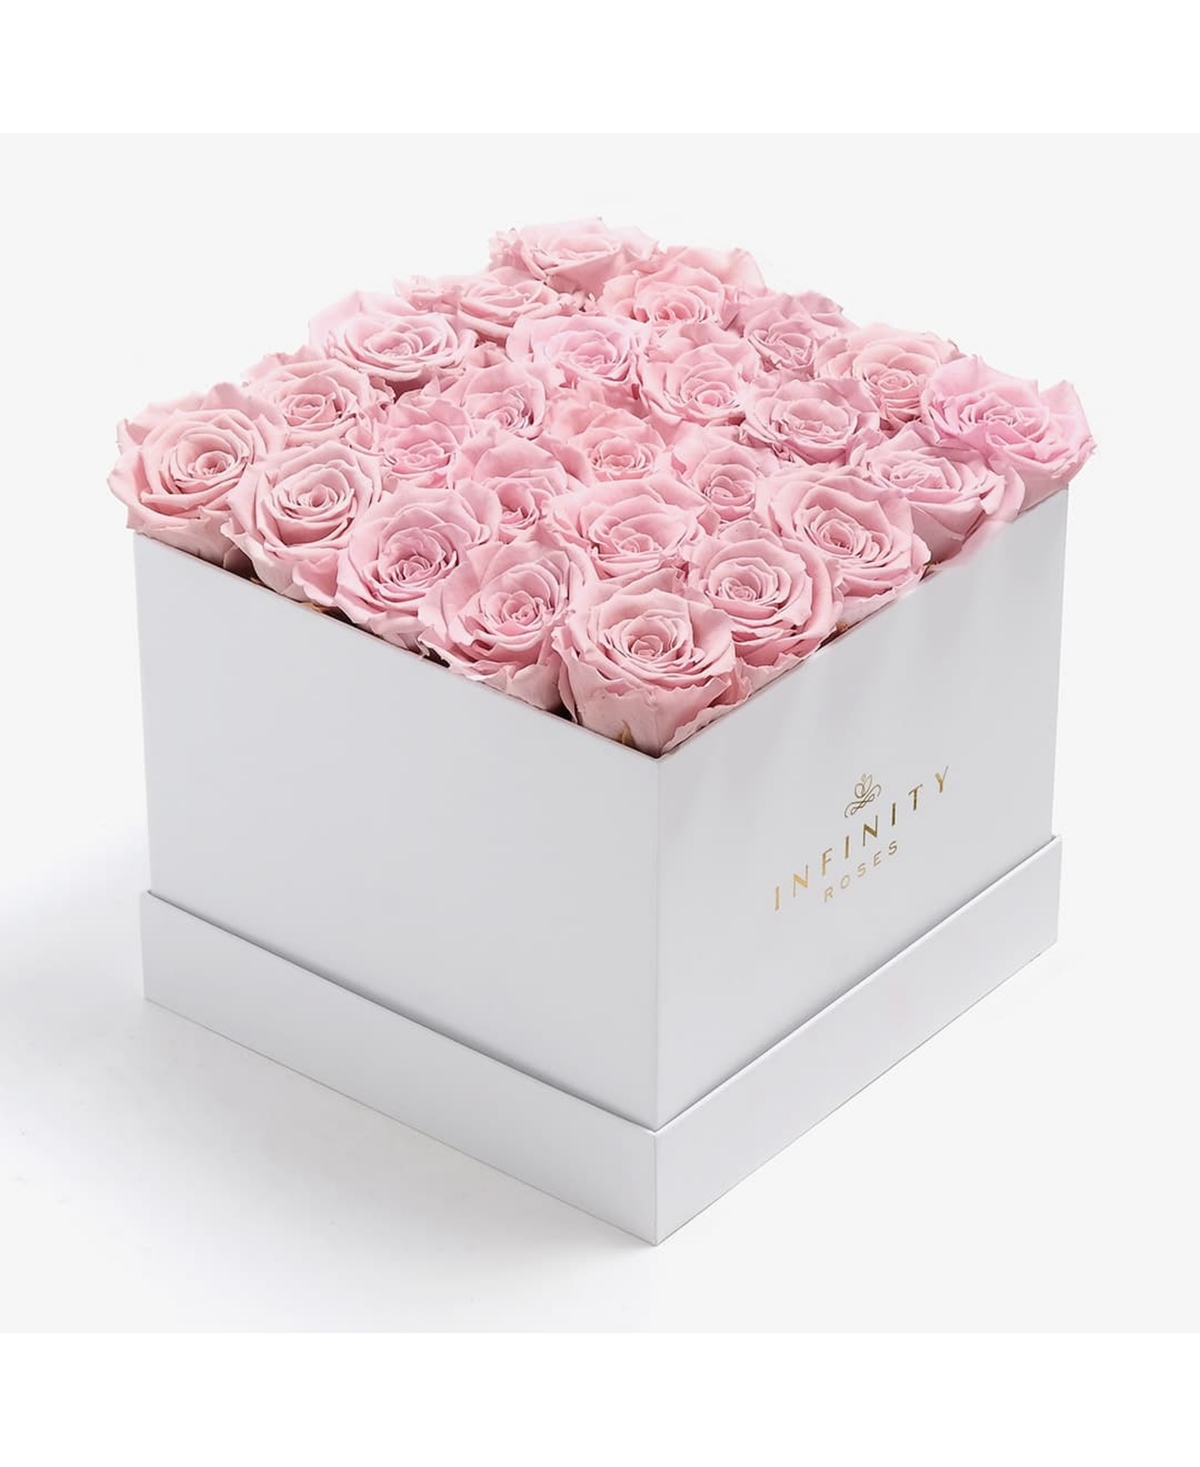 Square Box of 25 Pink Real Roses Preserved to Last Over a Year - Pink